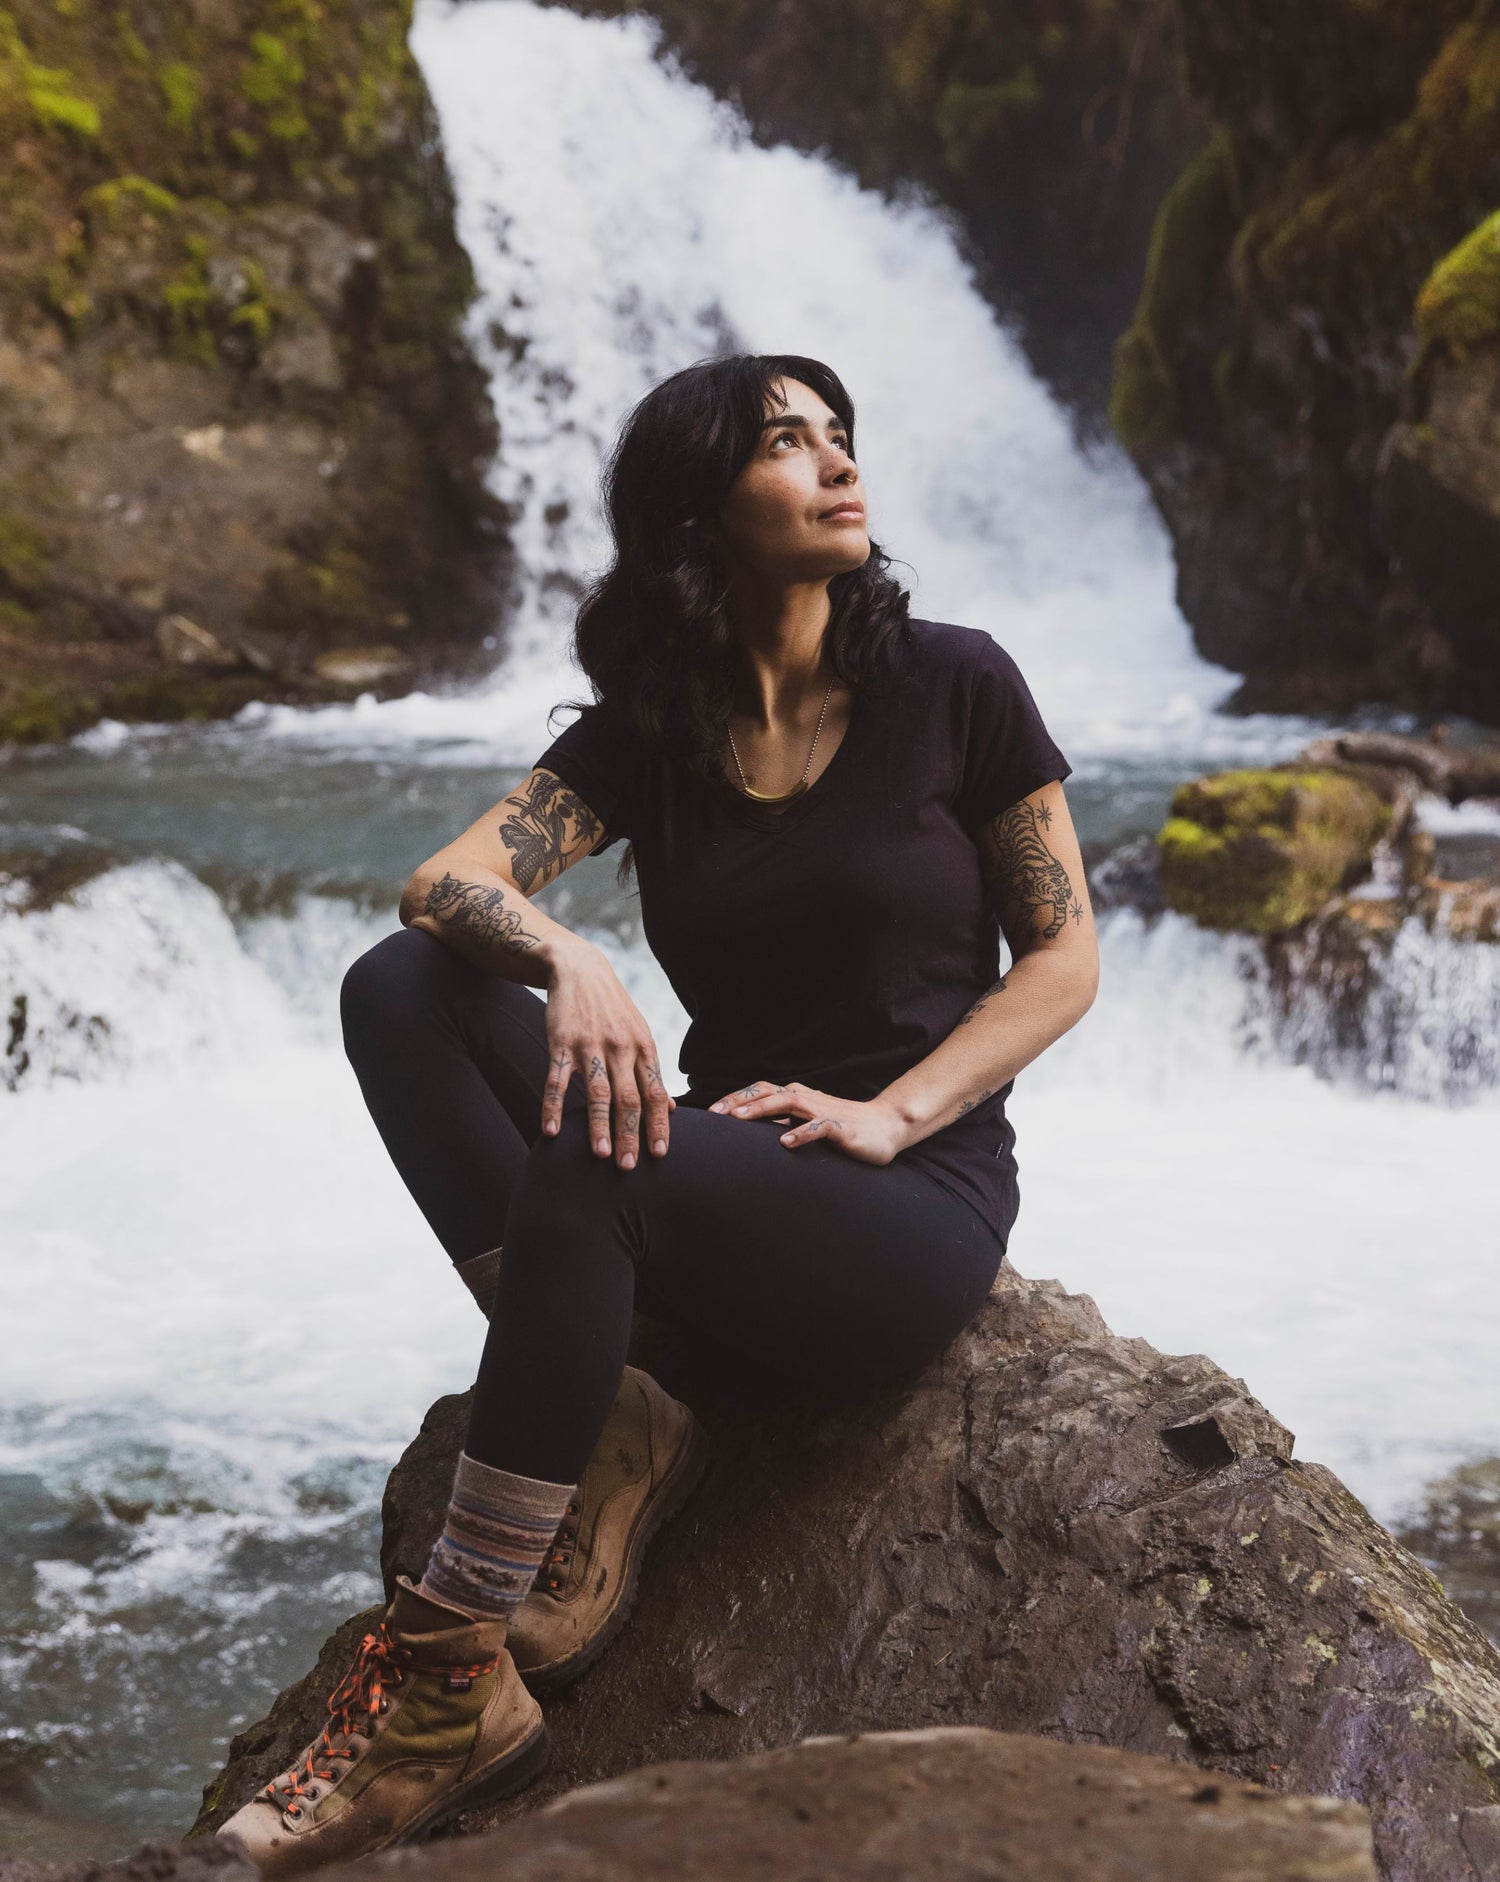 A lady in her black alpaca v-neck sitting in a rock by a river and a waterfall